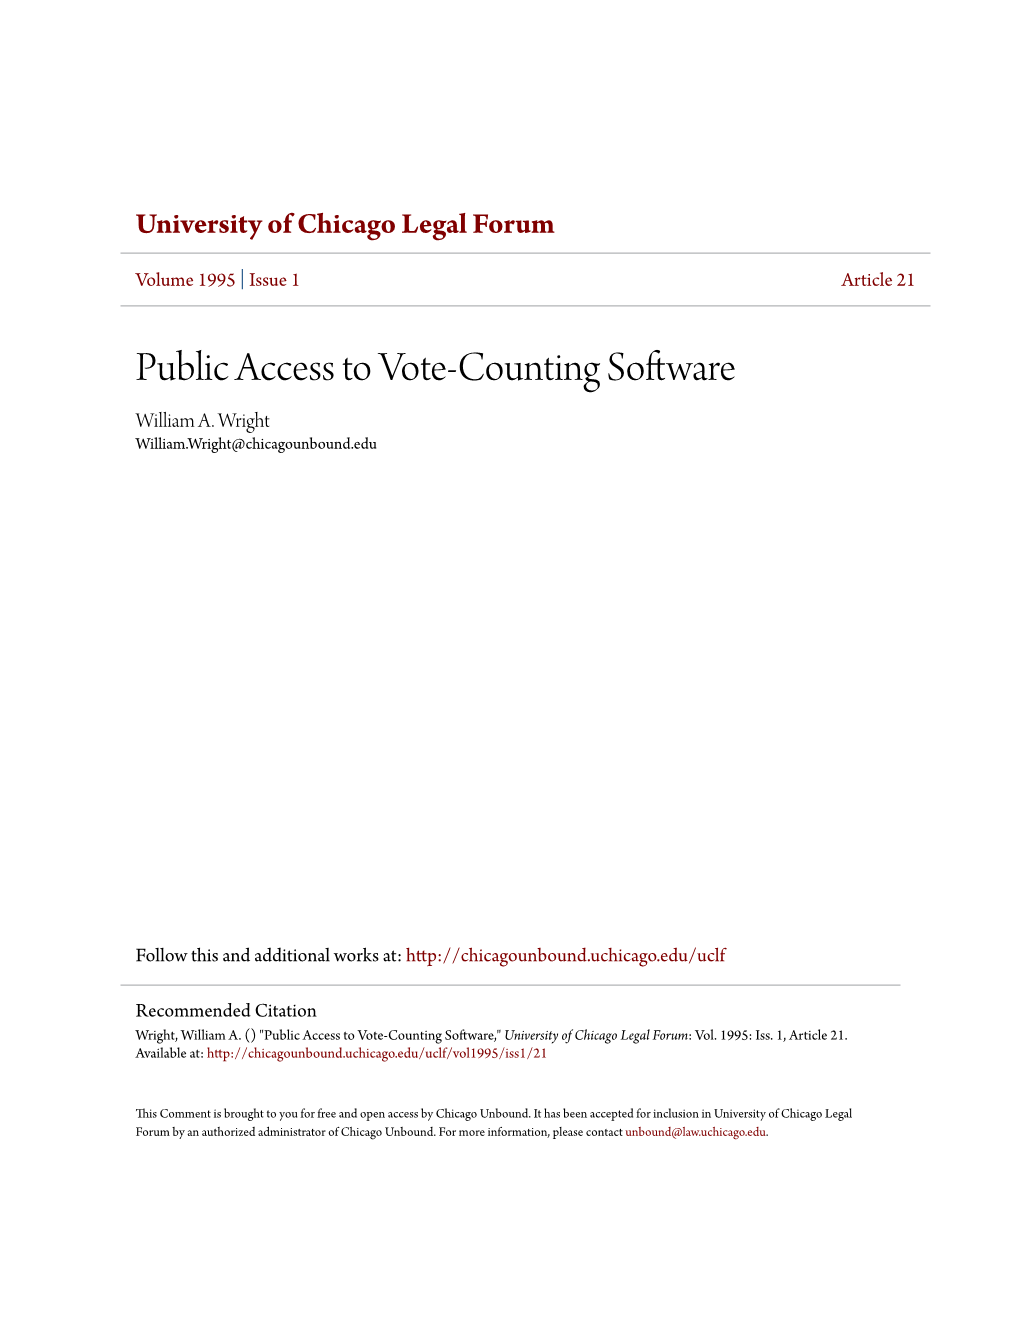 Public Access to Vote-Counting Software William A